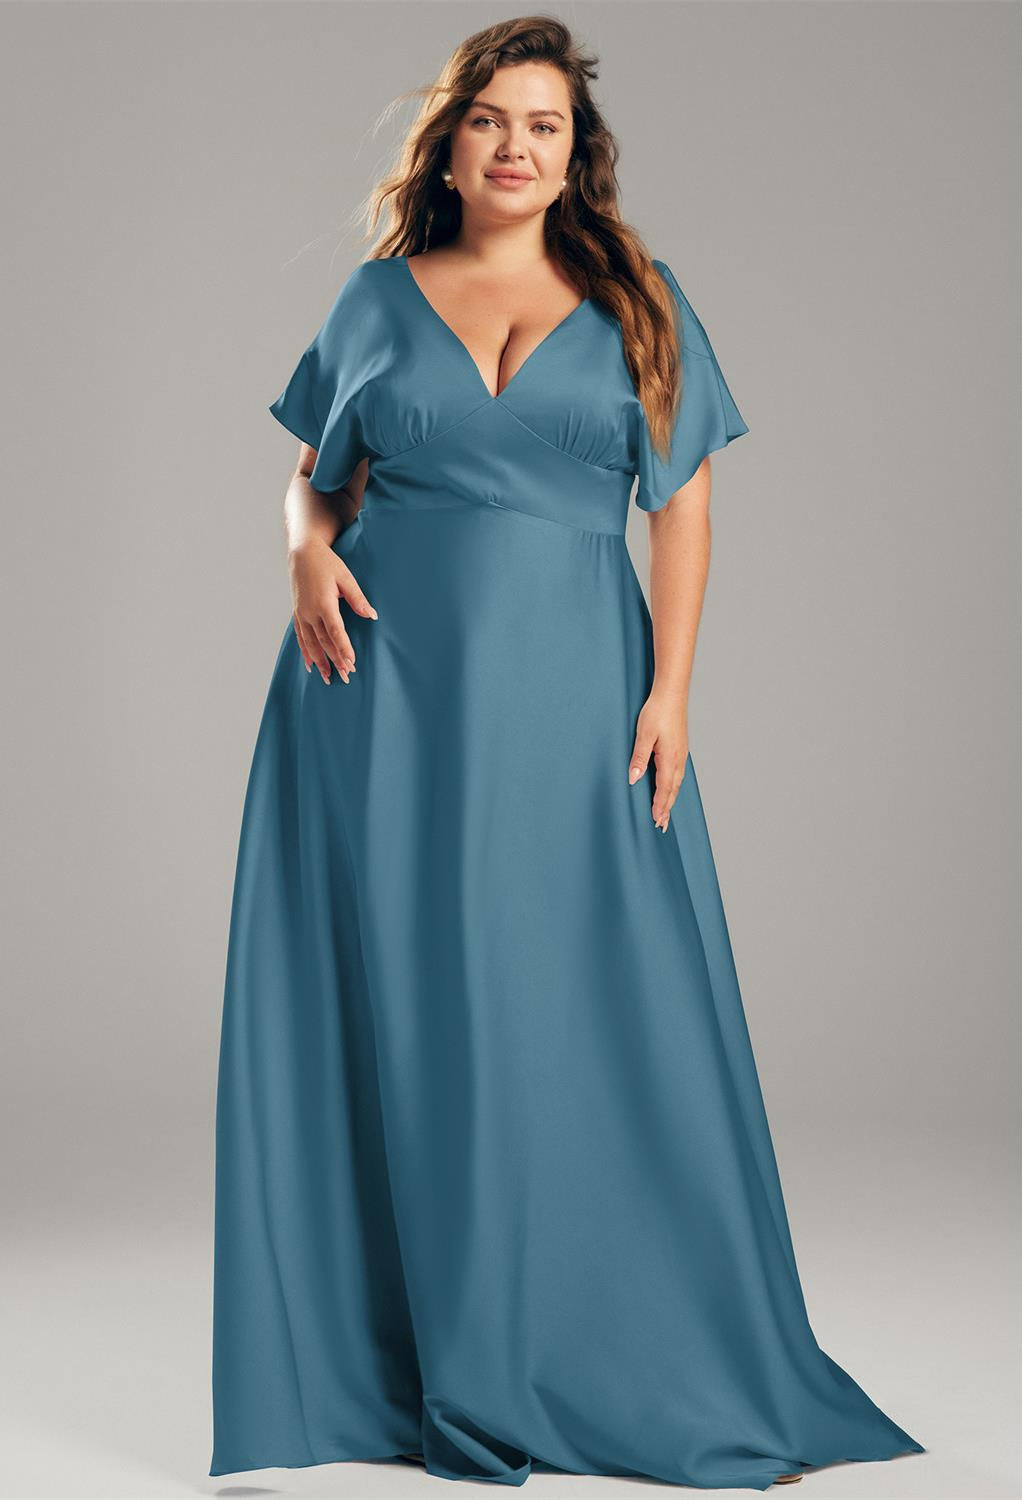 The Nora - Satin Charmeuse Bridesmaid Dress - Off The Rack by Bergamot Bridal in blue, plus size, with a v-neck can be found at bridal shops in London.